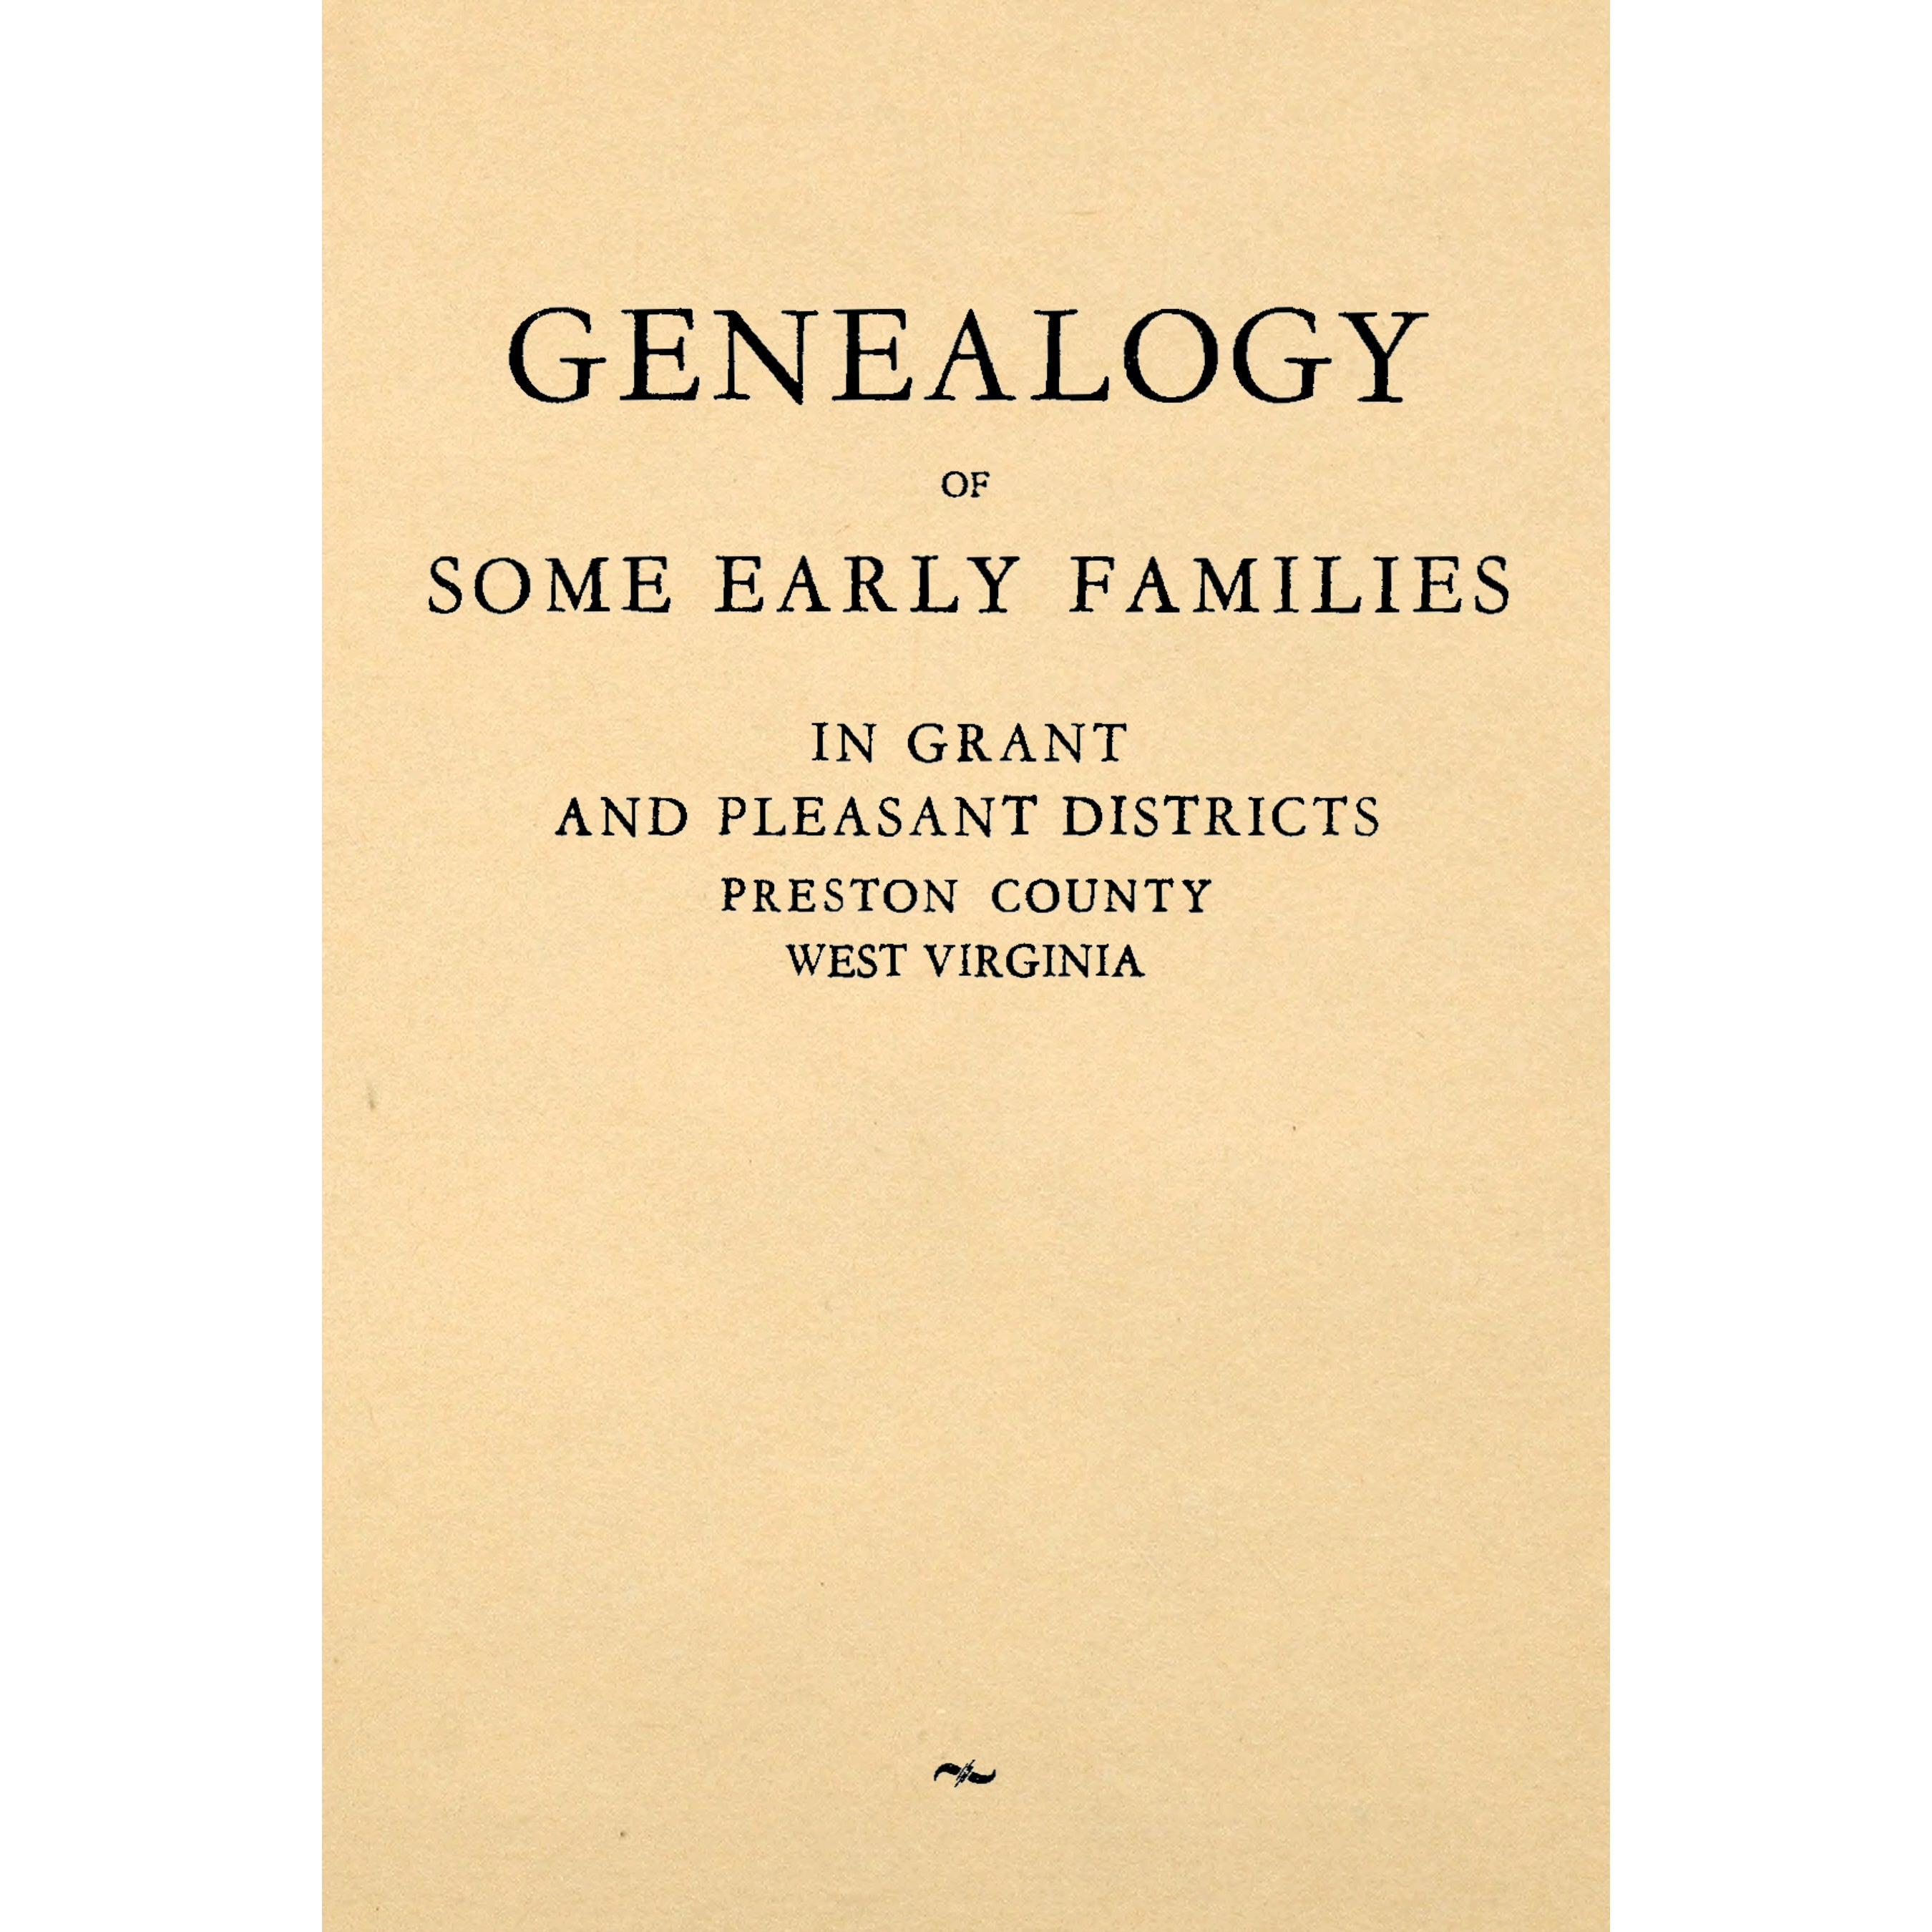 Genealogy of Some Early Families in Grant and Pleasant Districts, Preston County, West Virginia.